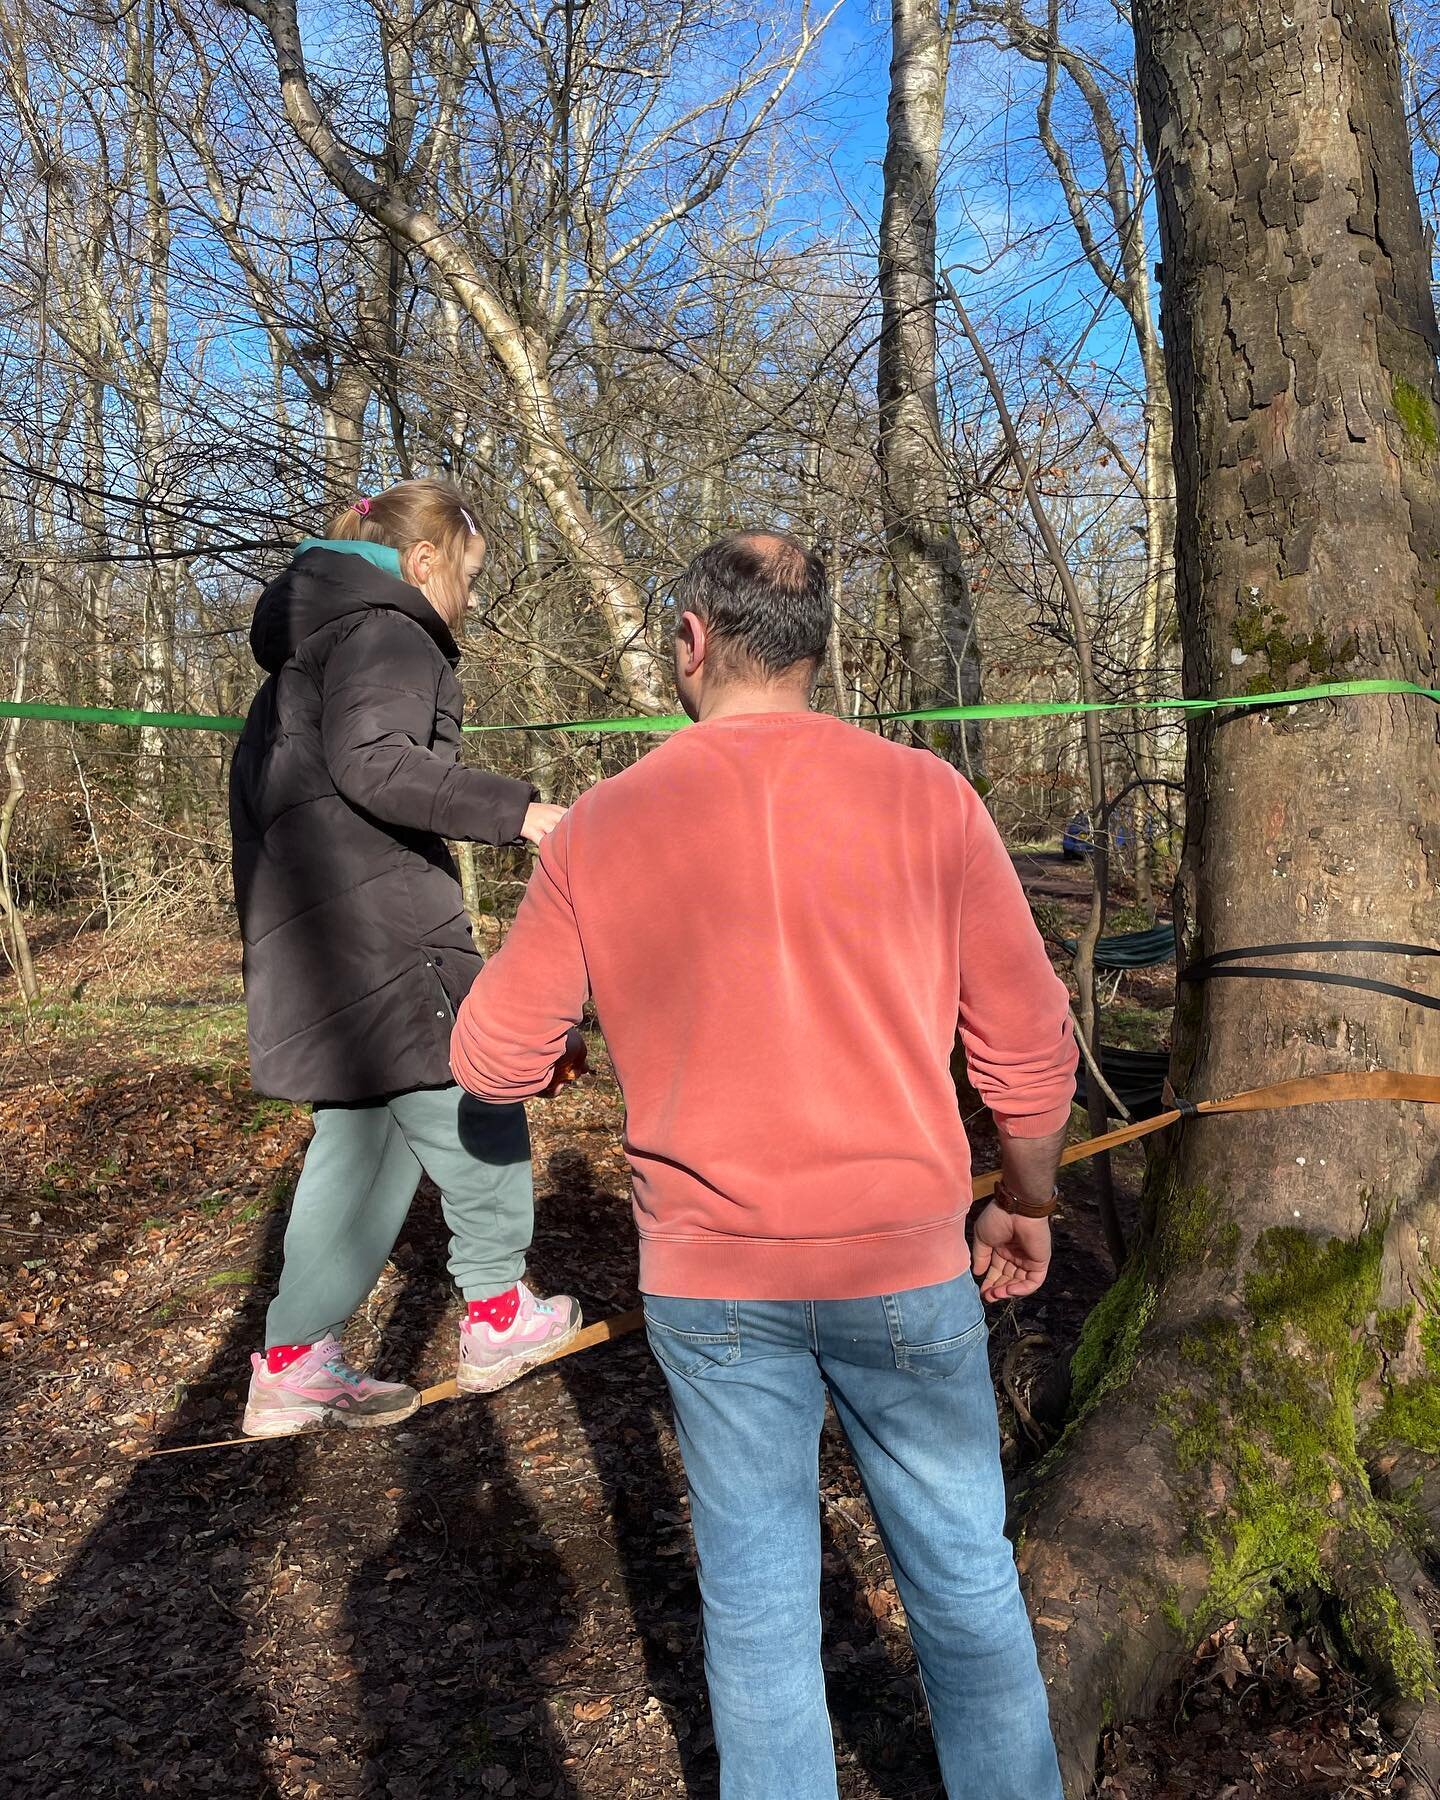 Gorgeous weather for an end of Feb Hols ASN Bushcraft Session at @gifford_community_woodland. Great to see families connecting and sharing experiences. 

Delivered in partnership with @eloutdoored and supported by @eastlothiancouncil